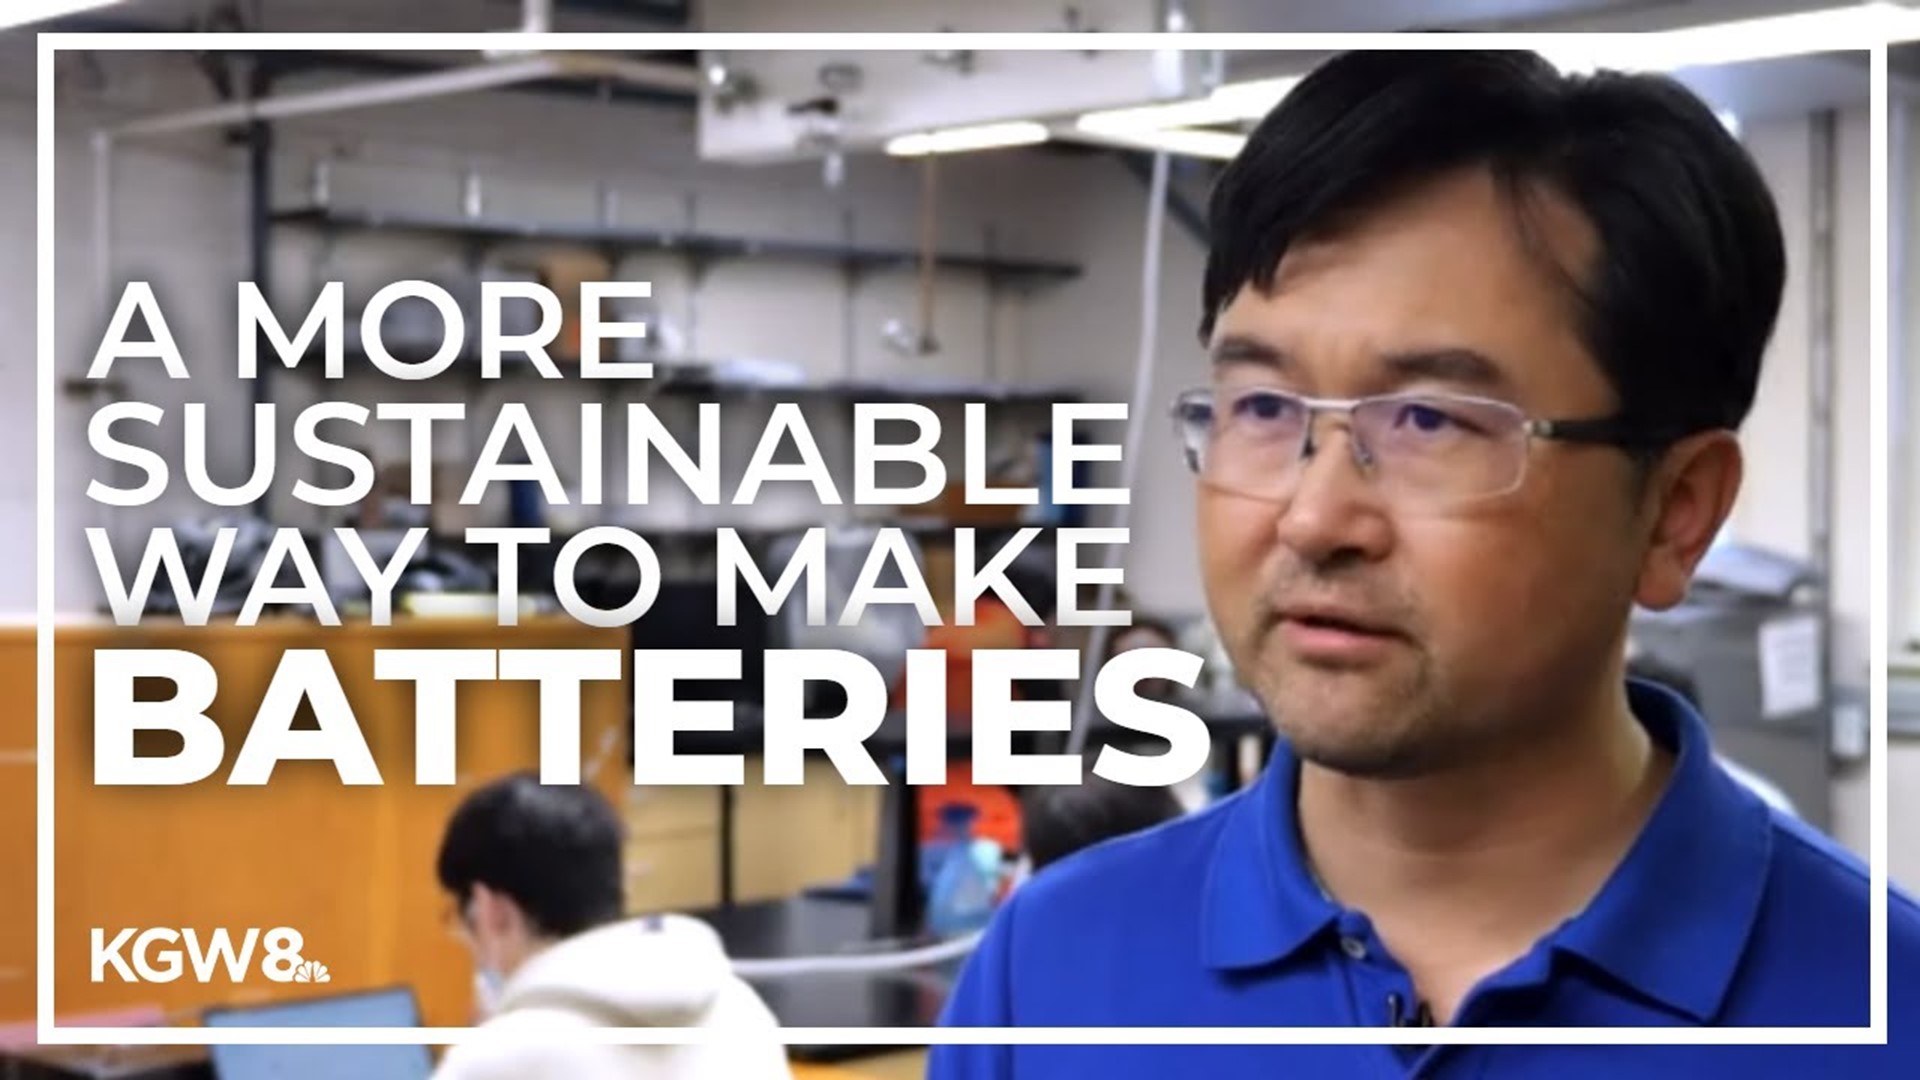 Oregon State University was the recipient of a $3 million grant for anion battery research. The raw materials to make anion batteries are more sustainable.